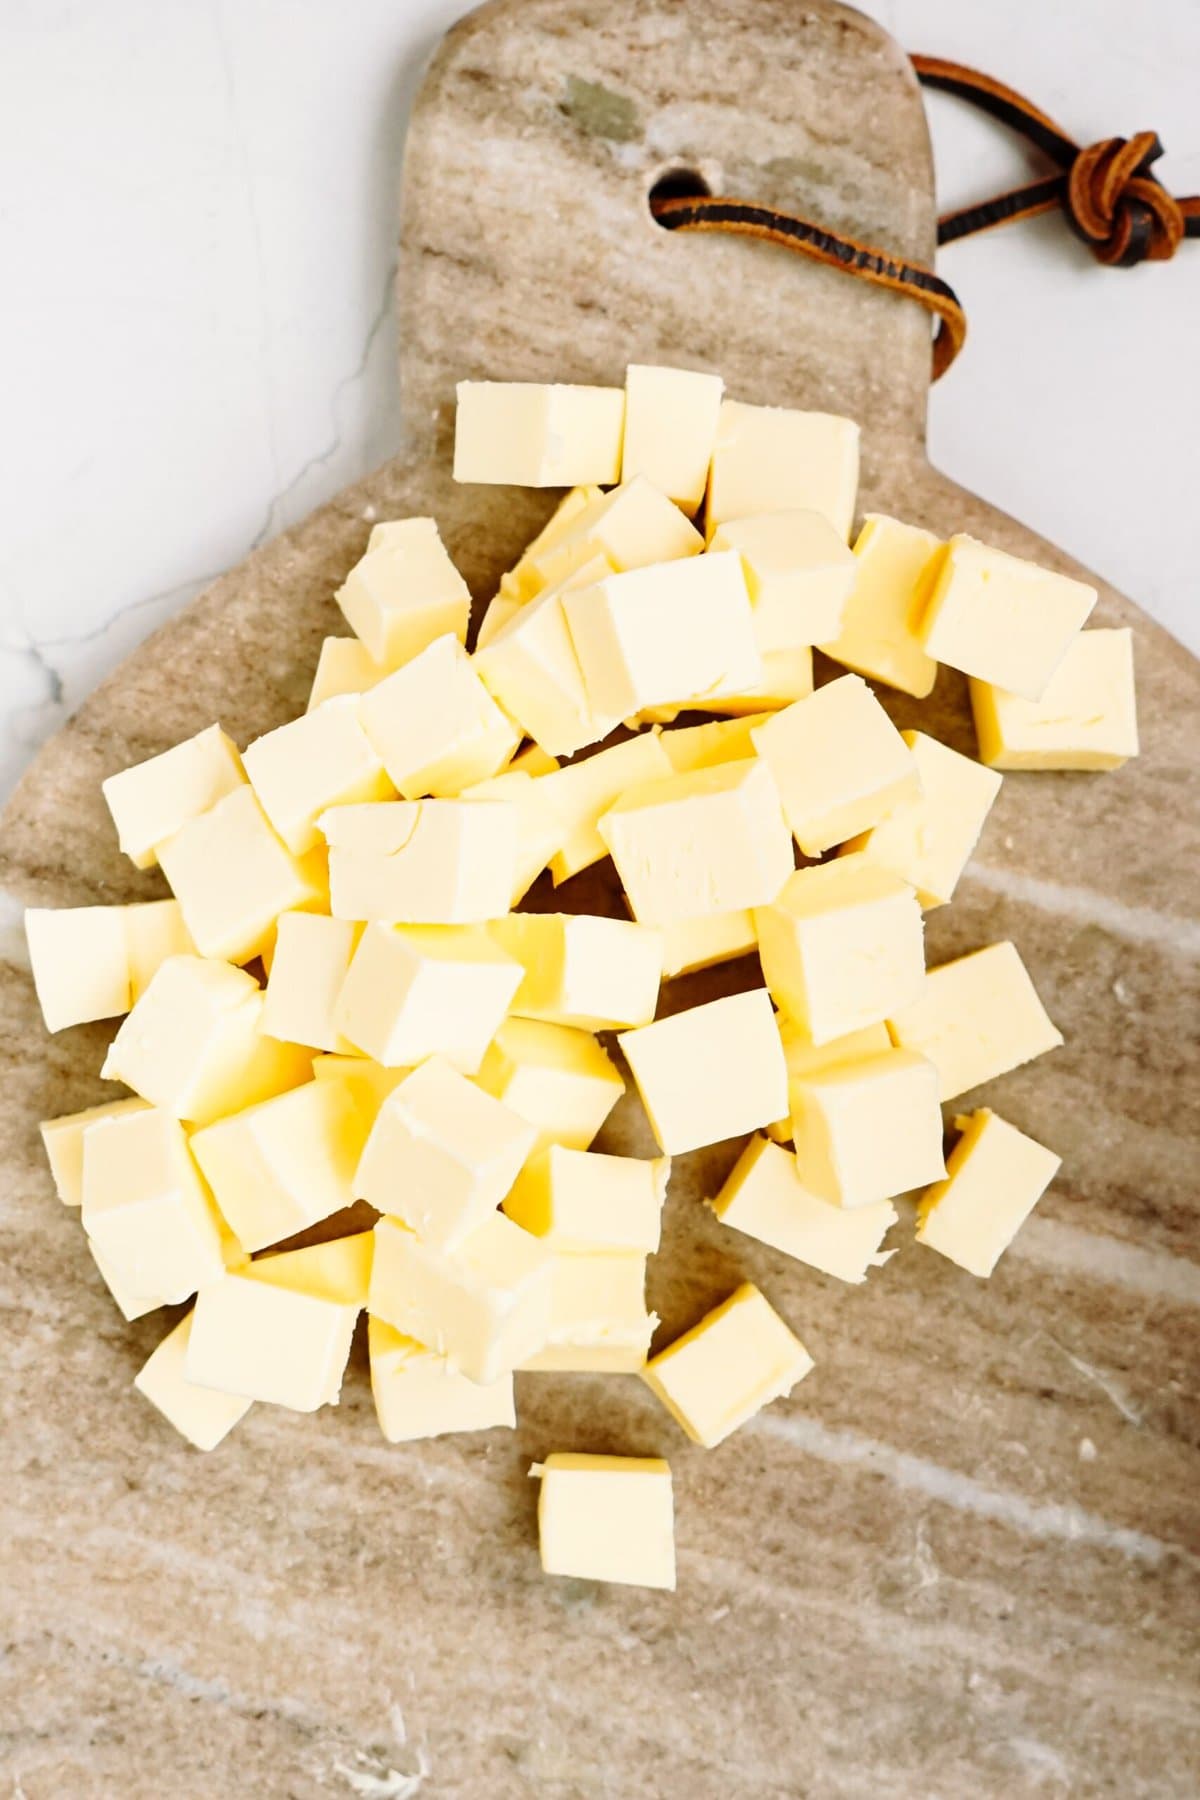 cubed butter on a wooden cutting board